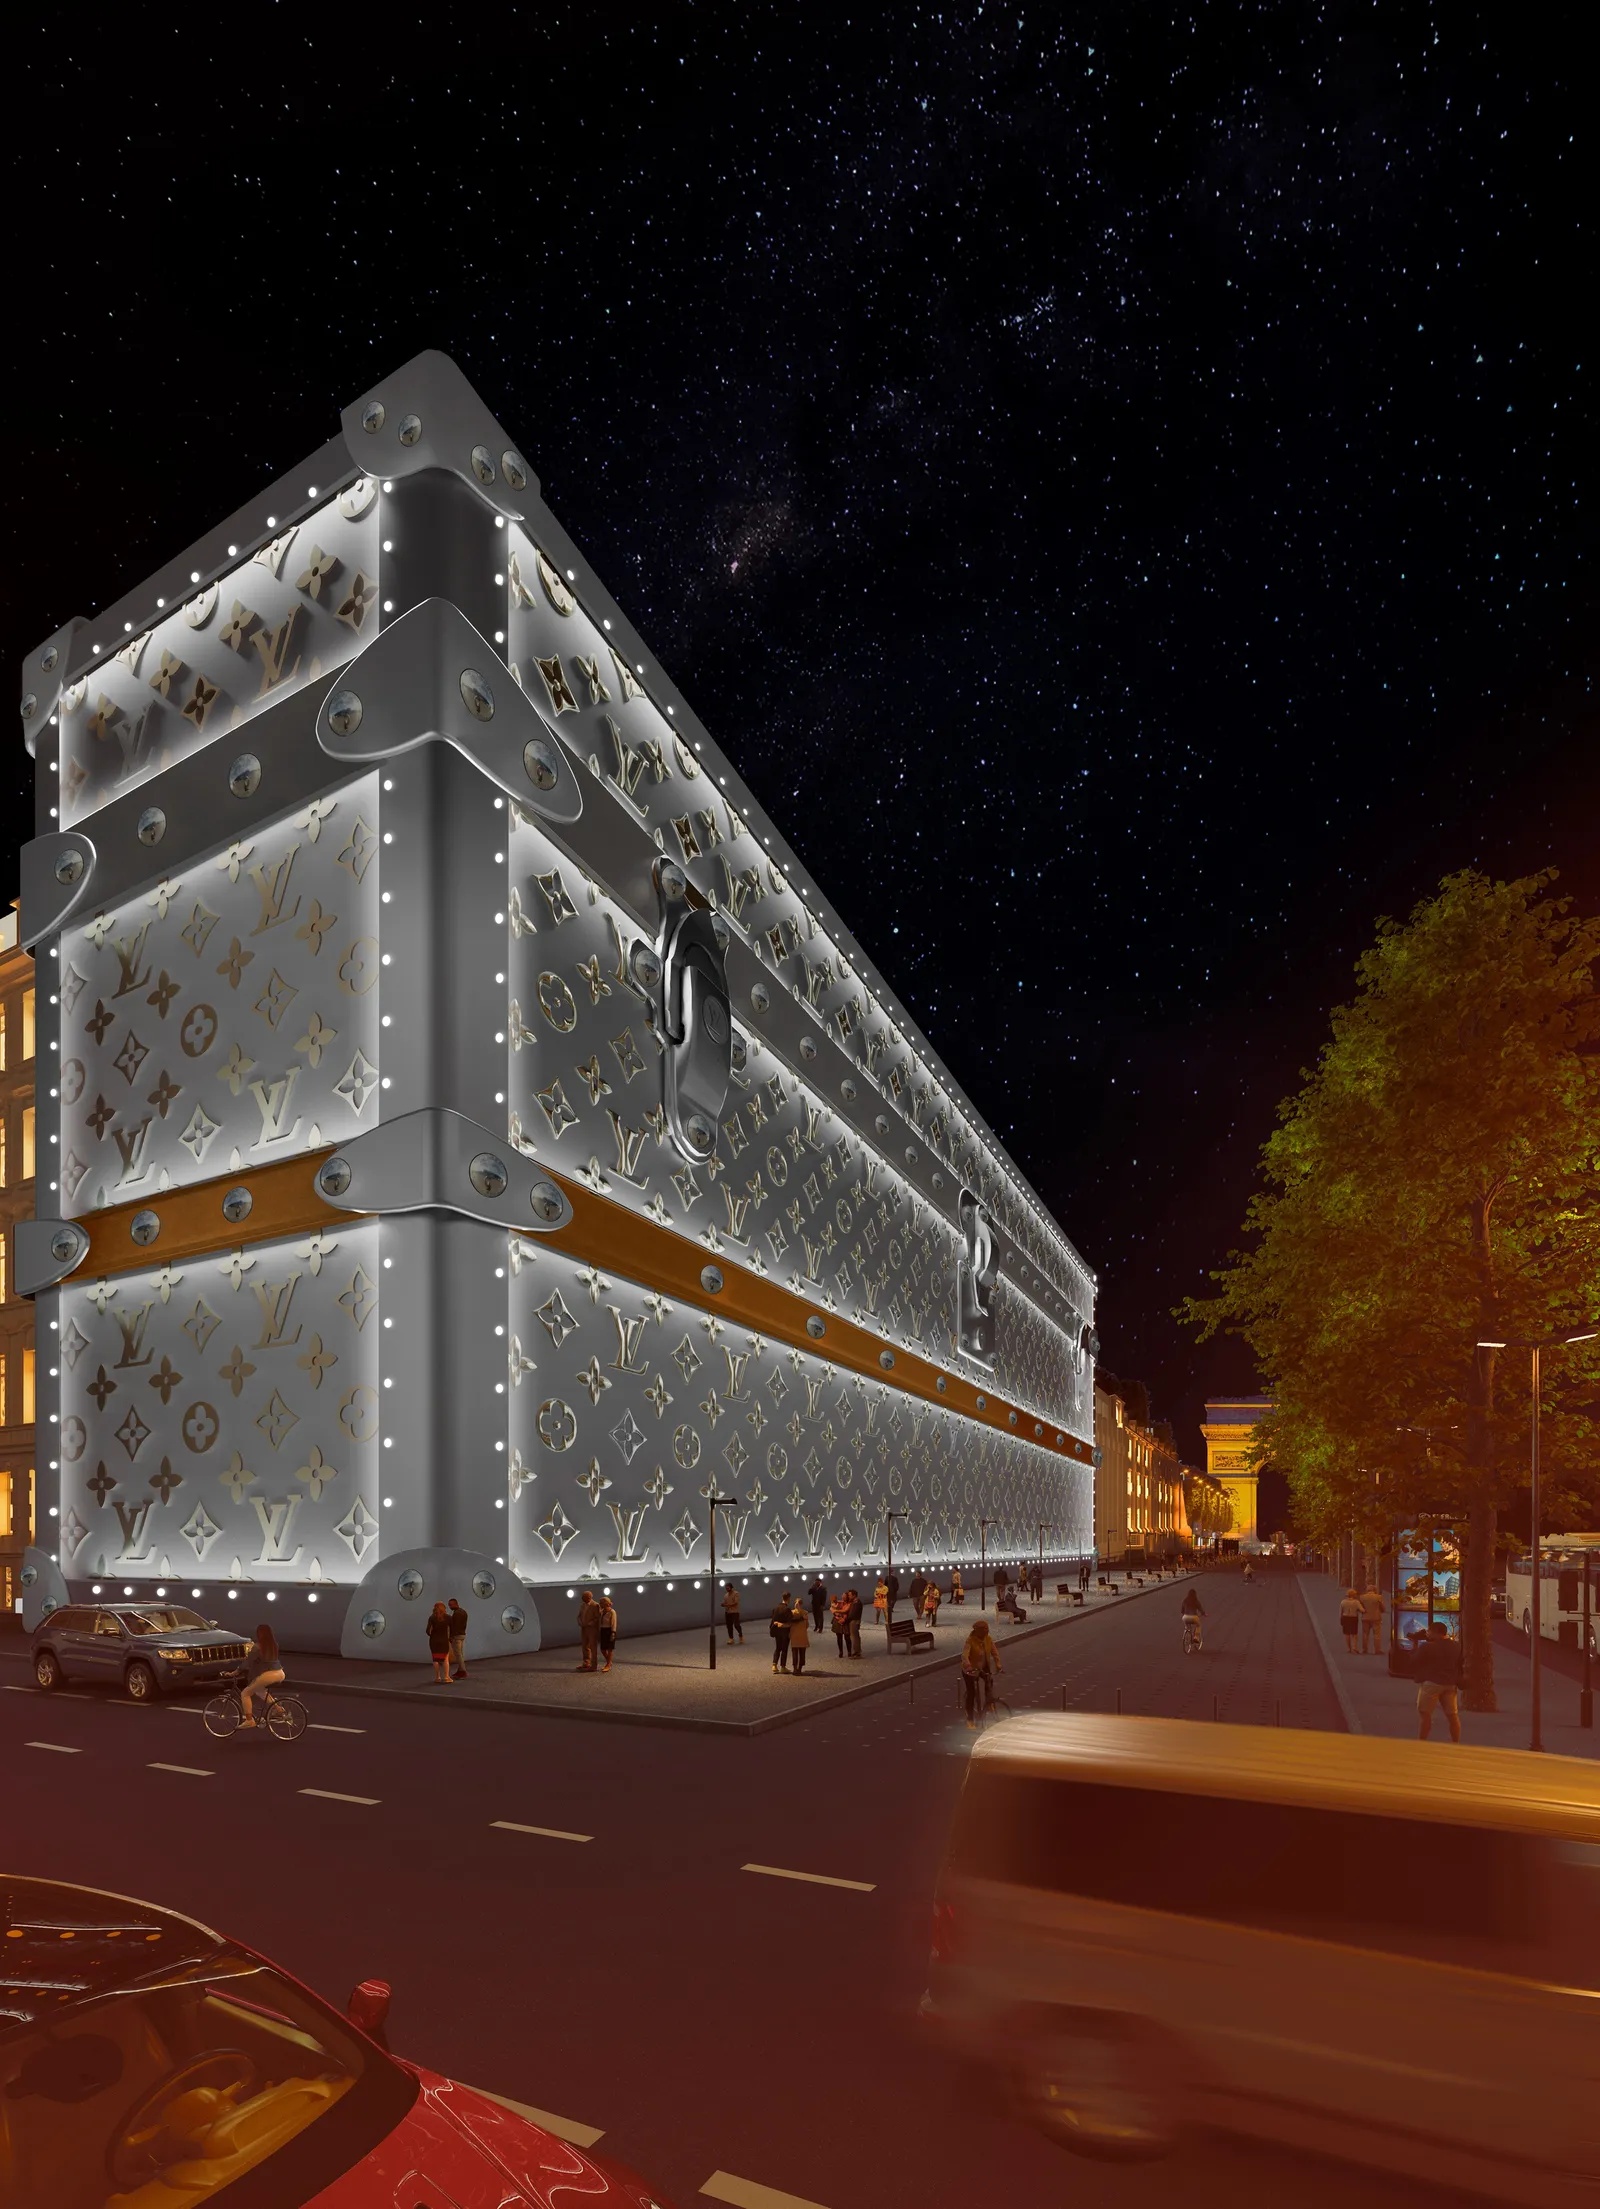 Louis Vuitton plans to open its first hotel in Paris in 2026. Image: Louis Vuitton on X